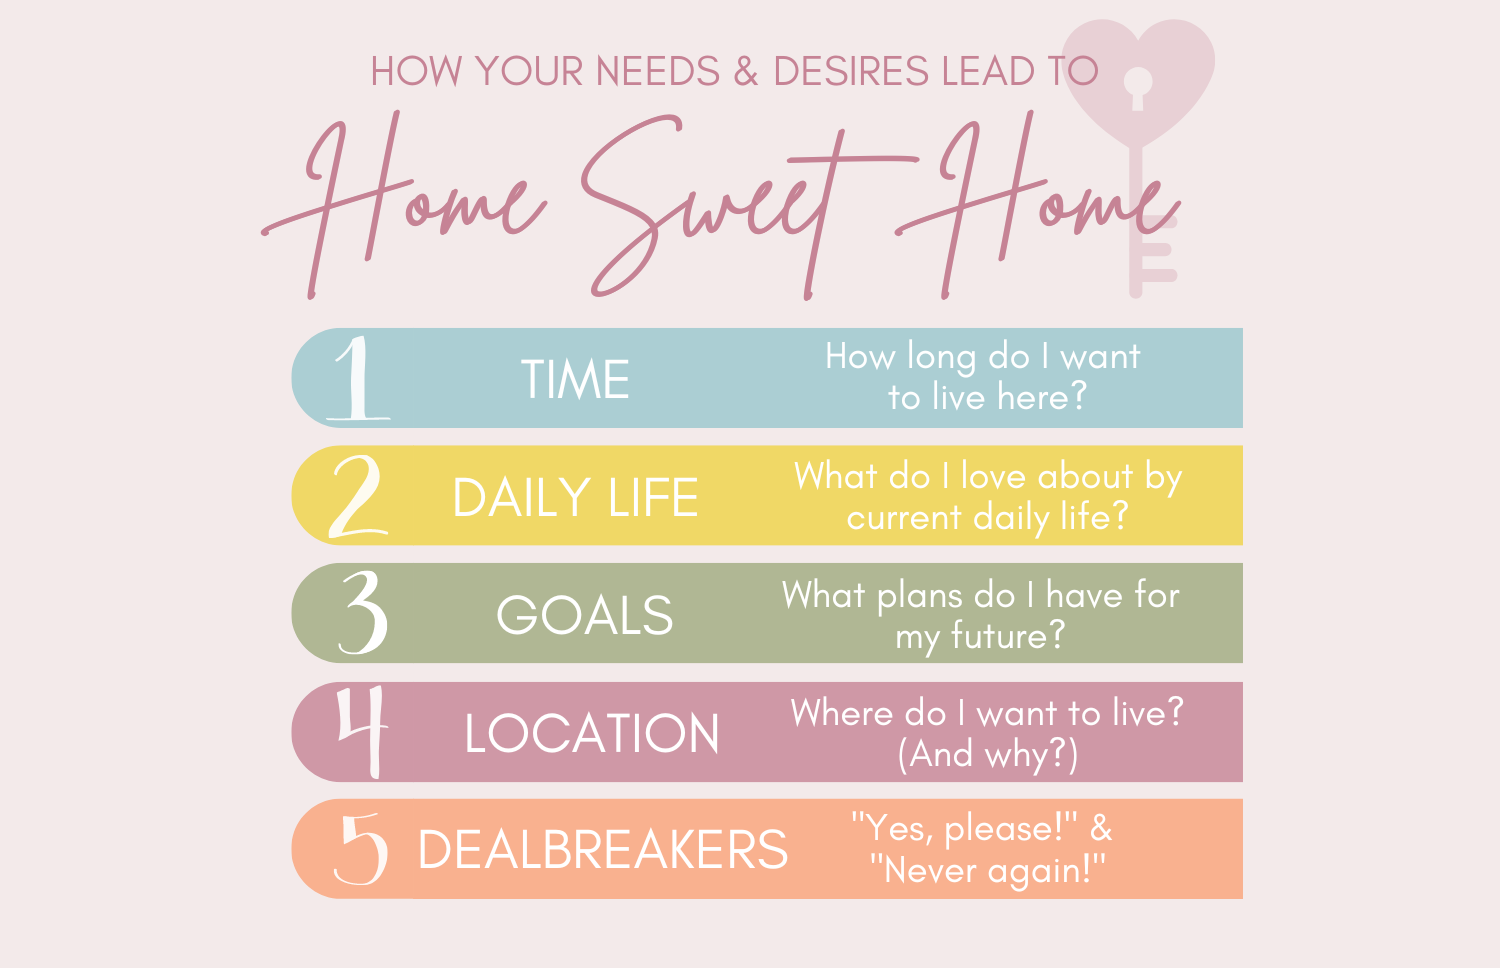 How Your Needs and Desires Lead To Home Sweet Home